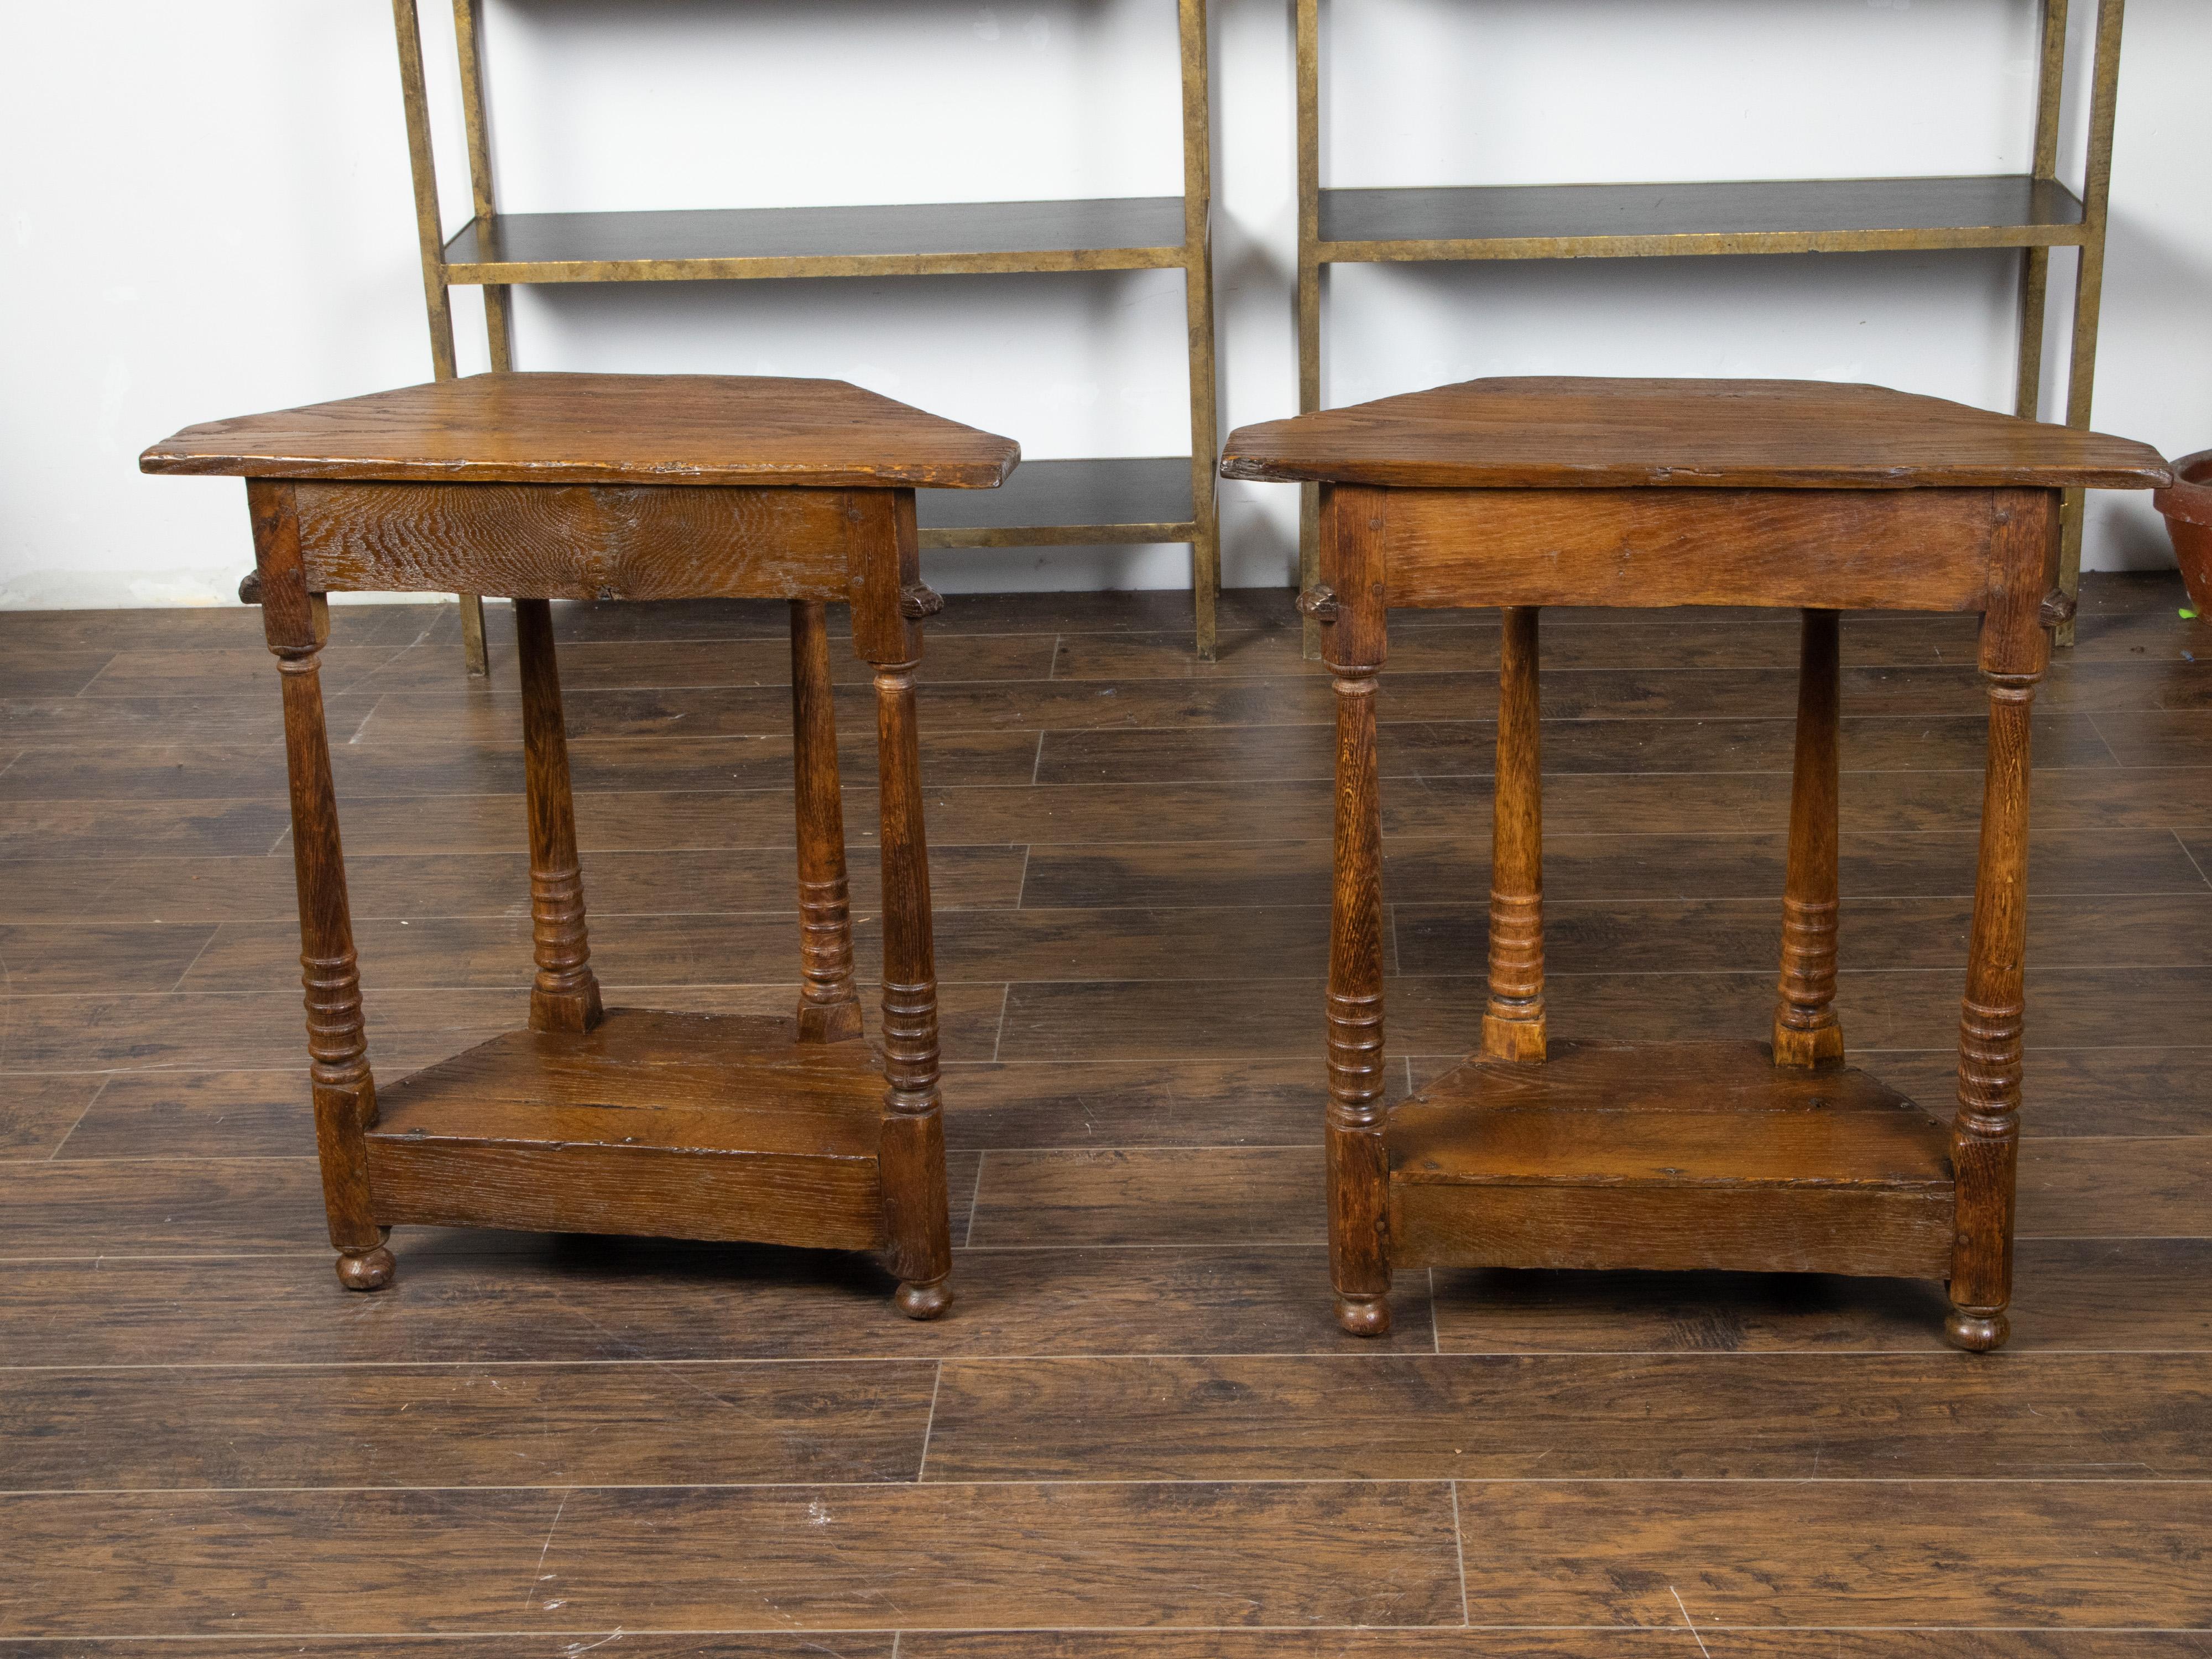 Pair of 19th Century English Carved Oak Demilune Tables with Column Legs For Sale 3